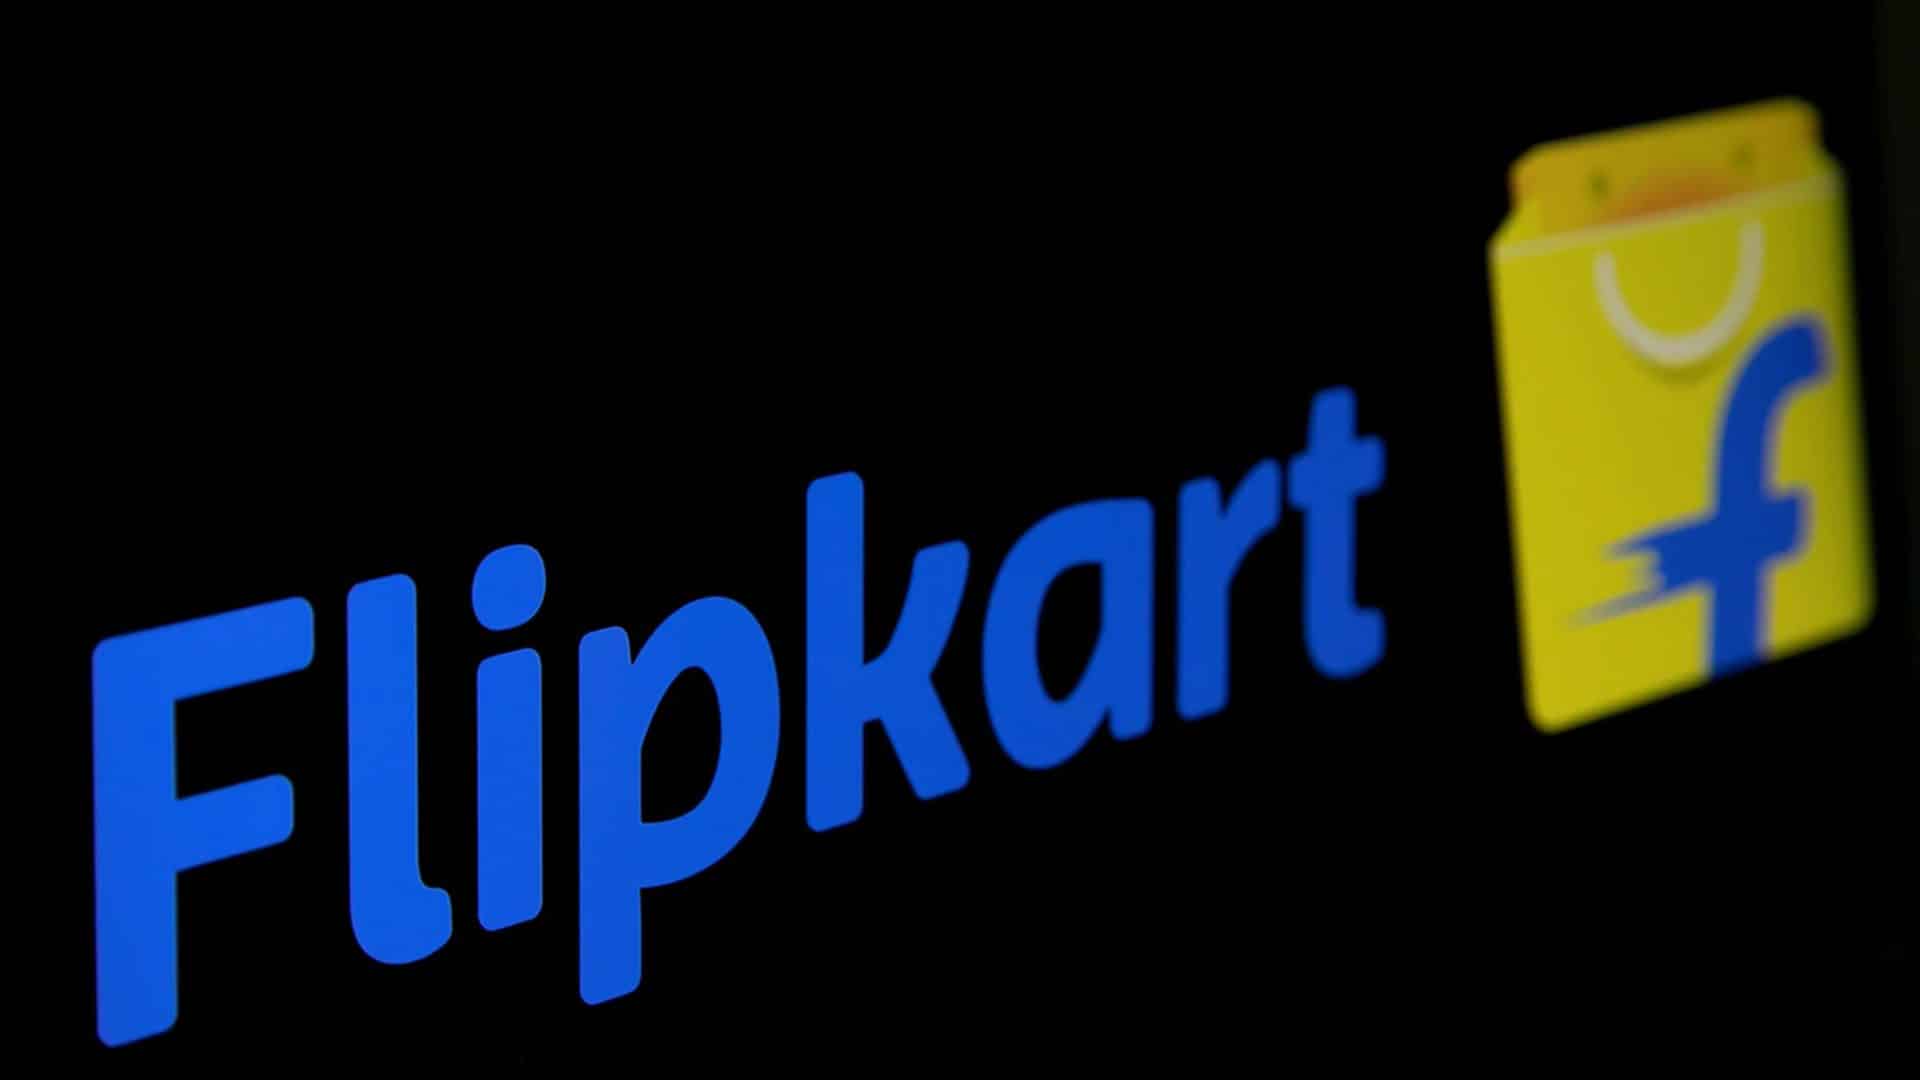 Flipkart Wholesale offers easy credit facility to support Kirana retailers